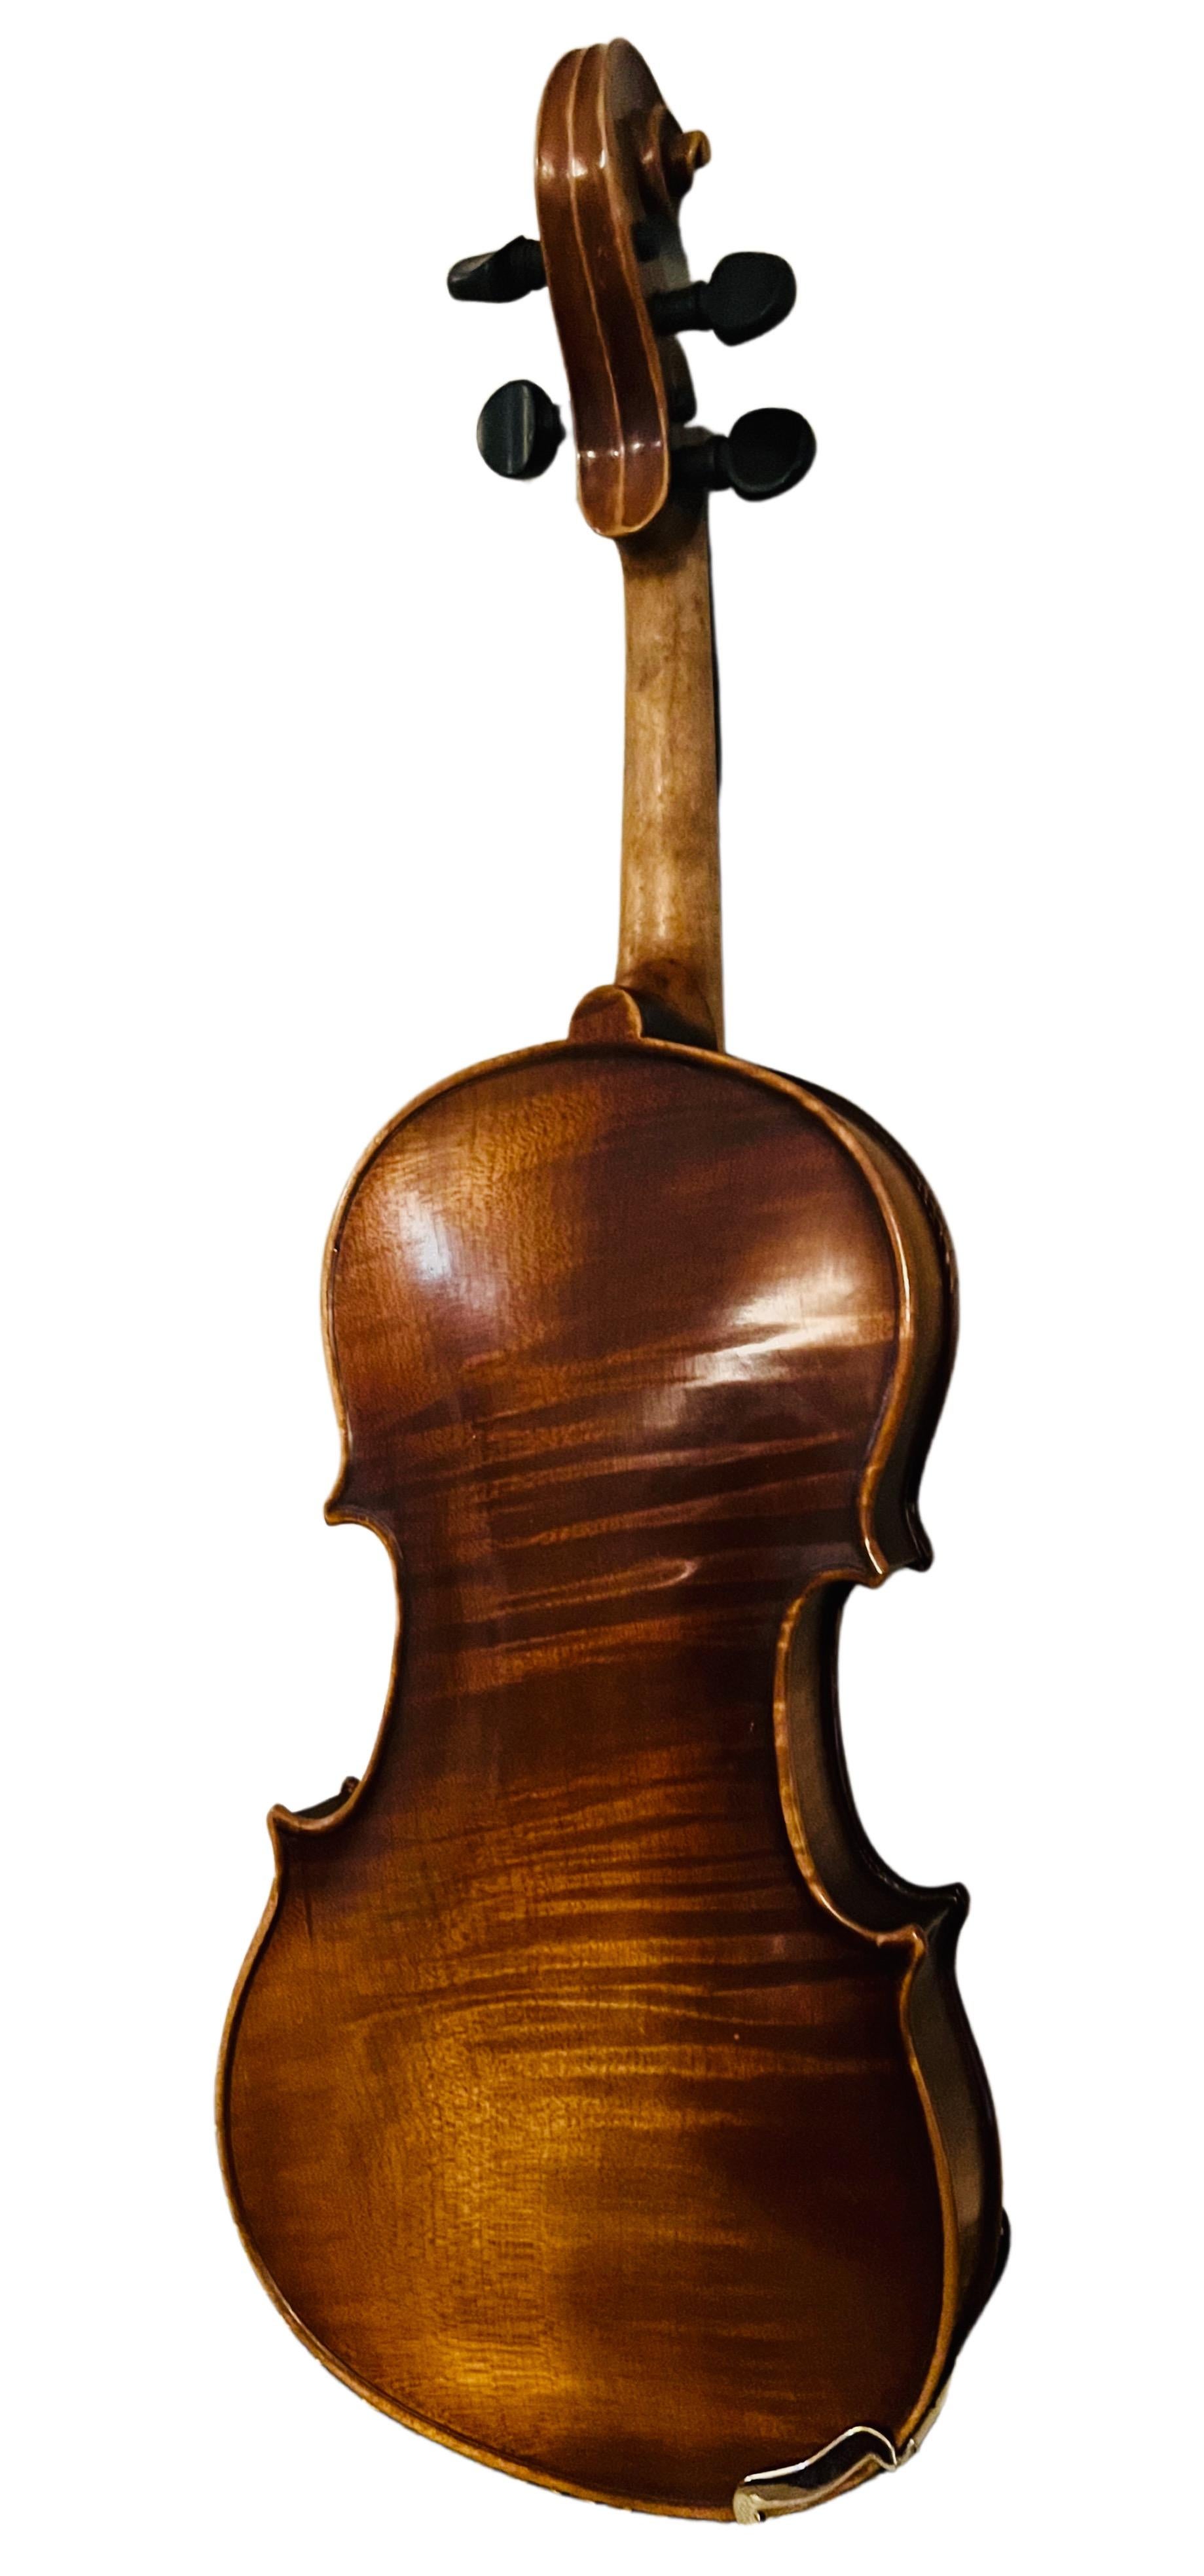 1970 3/4 E.R. Pfretzschner Hand-Crafted Violin in the Style of A. Stradivarius im Angebot 3